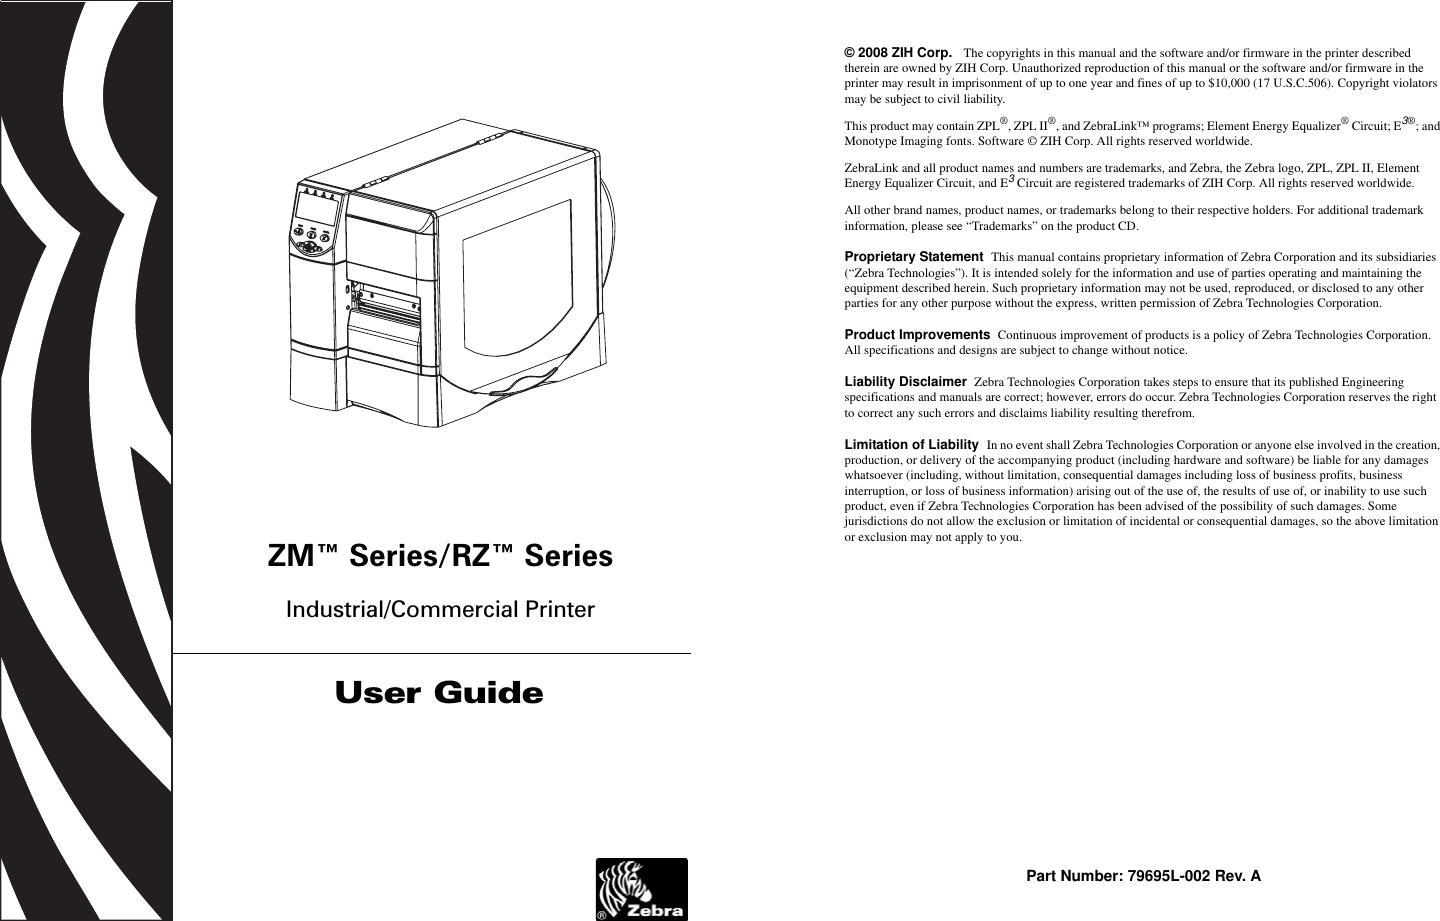 ZM™ Series/RZ™ SeriesIndustrial/Commercial PrinterUser Guide© 2008 ZIH Corp.   The copyrights in this manual and the software and/or firmware in the printer described therein are owned by ZIH Corp. Unauthorized reproduction of this manual or the software and/or firmware in the printer may result in imprisonment of up to one year and fines of up to $10,000 (17 U.S.C.506). Copyright violators may be subject to civil liability.This product may contain ZPL®, ZPL II®, and ZebraLink™ programs; Element Energy Equalizer® Circuit; E3®; and Monotype Imaging fonts. Software © ZIH Corp. All rights reserved worldwide.ZebraLink and all product names and numbers are trademarks, and Zebra, the Zebra logo, ZPL, ZPL II, Element Energy Equalizer Circuit, and E3 Circuit are registered trademarks of ZIH Corp. All rights reserved worldwide.All other brand names, product names, or trademarks belong to their respective holders. For additional trademark information, please see “Trademarks” on the product CD.Proprietary Statement  This manual contains proprietary information of Zebra Corporation and its subsidiaries (“Zebra Technologies”). It is intended solely for the information and use of parties operating and maintaining the equipment described herein. Such proprietary information may not be used, reproduced, or disclosed to any other parties for any other purpose without the express, written permission of Zebra Technologies Corporation.Product Improvements  Continuous improvement of products is a policy of Zebra Technologies Corporation. All specifications and designs are subject to change without notice.Liability Disclaimer  Zebra Technologies Corporation takes steps to ensure that its published Engineering specifications and manuals are correct; however, errors do occur. Zebra Technologies Corporation reserves the right to correct any such errors and disclaims liability resulting therefrom.Limitation of Liability  In no event shall Zebra Technologies Corporation or anyone else involved in the creation, production, or delivery of the accompanying product (including hardware and software) be liable for any damages whatsoever (including, without limitation, consequential damages including loss of business profits, business interruption, or loss of business information) arising out of the use of, the results of use of, or inability to use such product, even if Zebra Technologies Corporation has been advised of the possibility of such damages. Some jurisdictions do not allow the exclusion or limitation of incidental or consequential damages, so the above limitation or exclusion may not apply to you.Part Number: 79695L-002 Rev. A